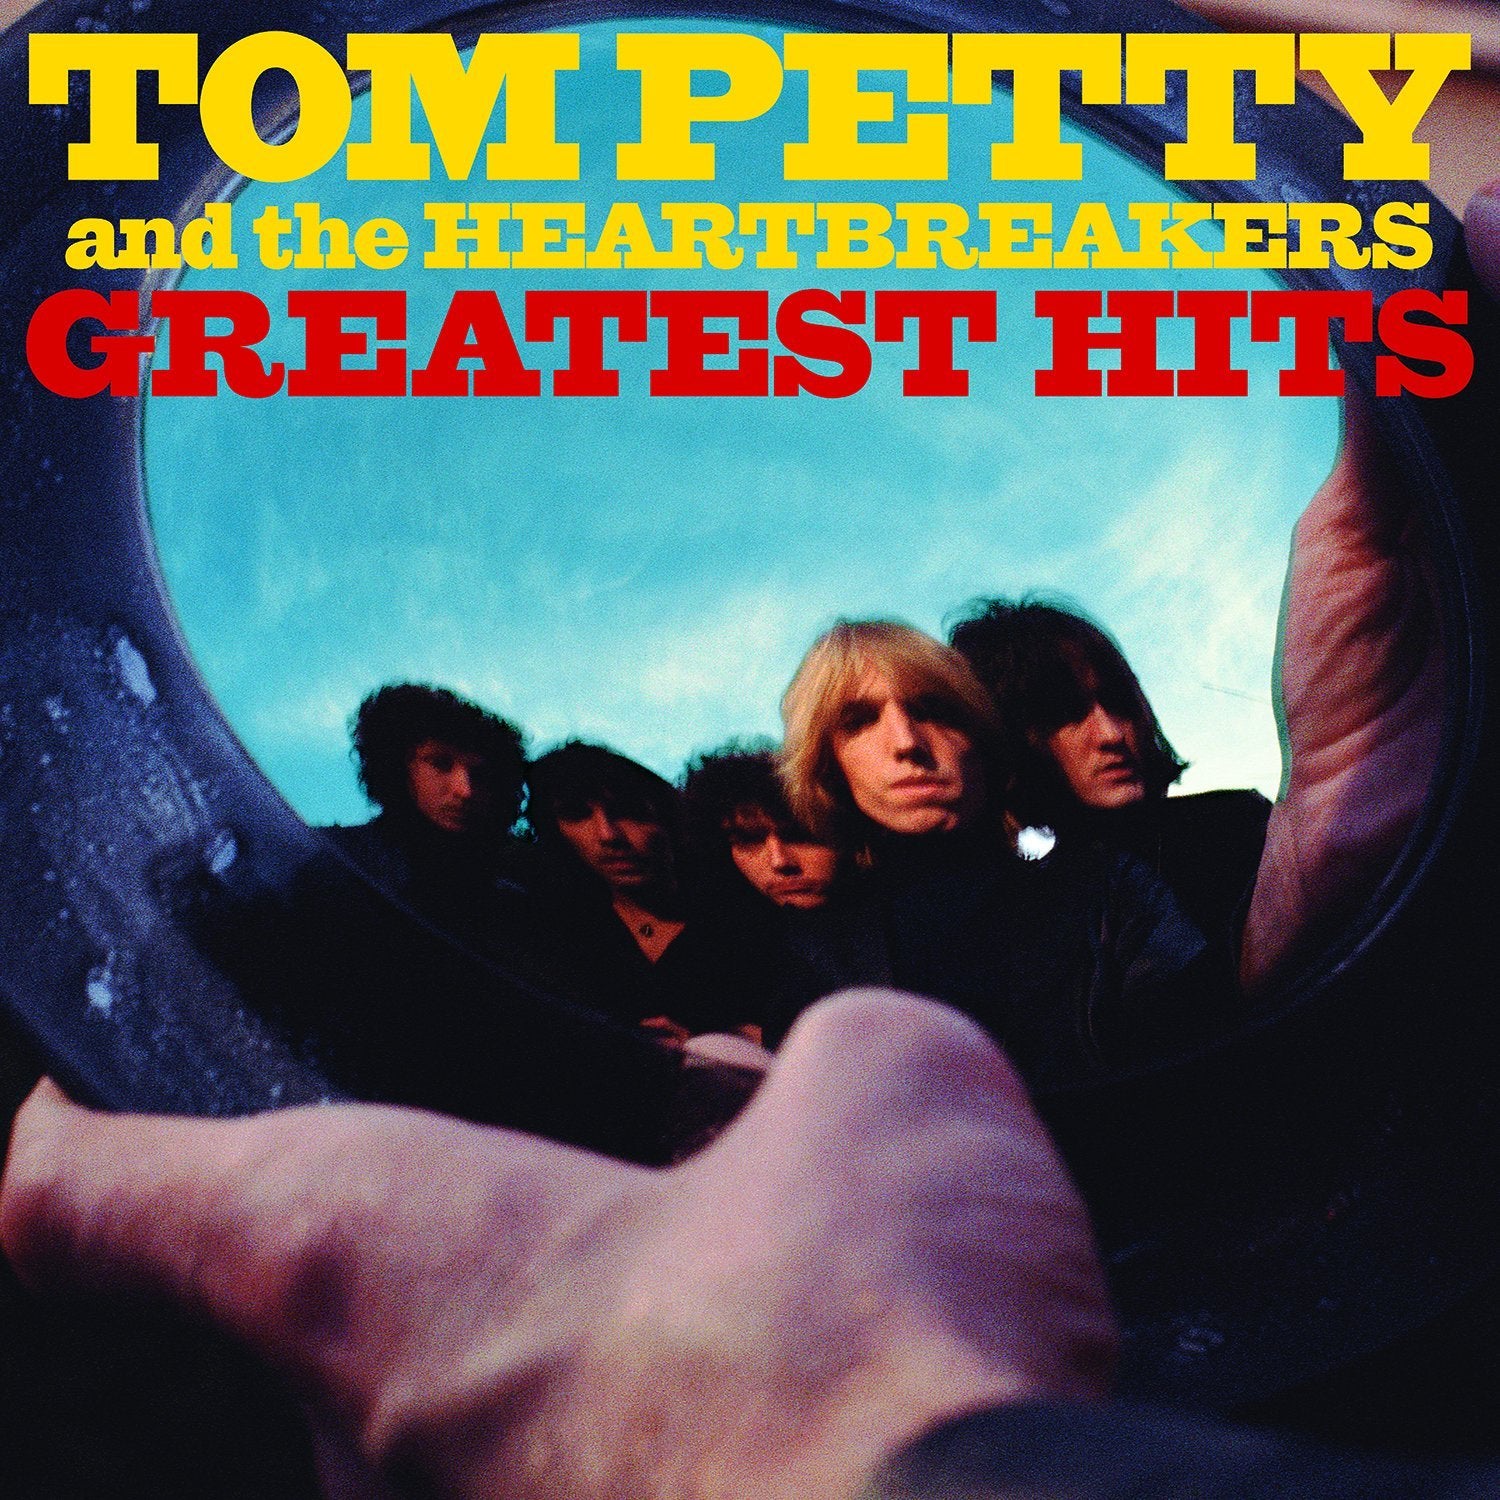 Petty, Tom And The Heartbreakers: Greatest Hits (Vinyl 2xLP)